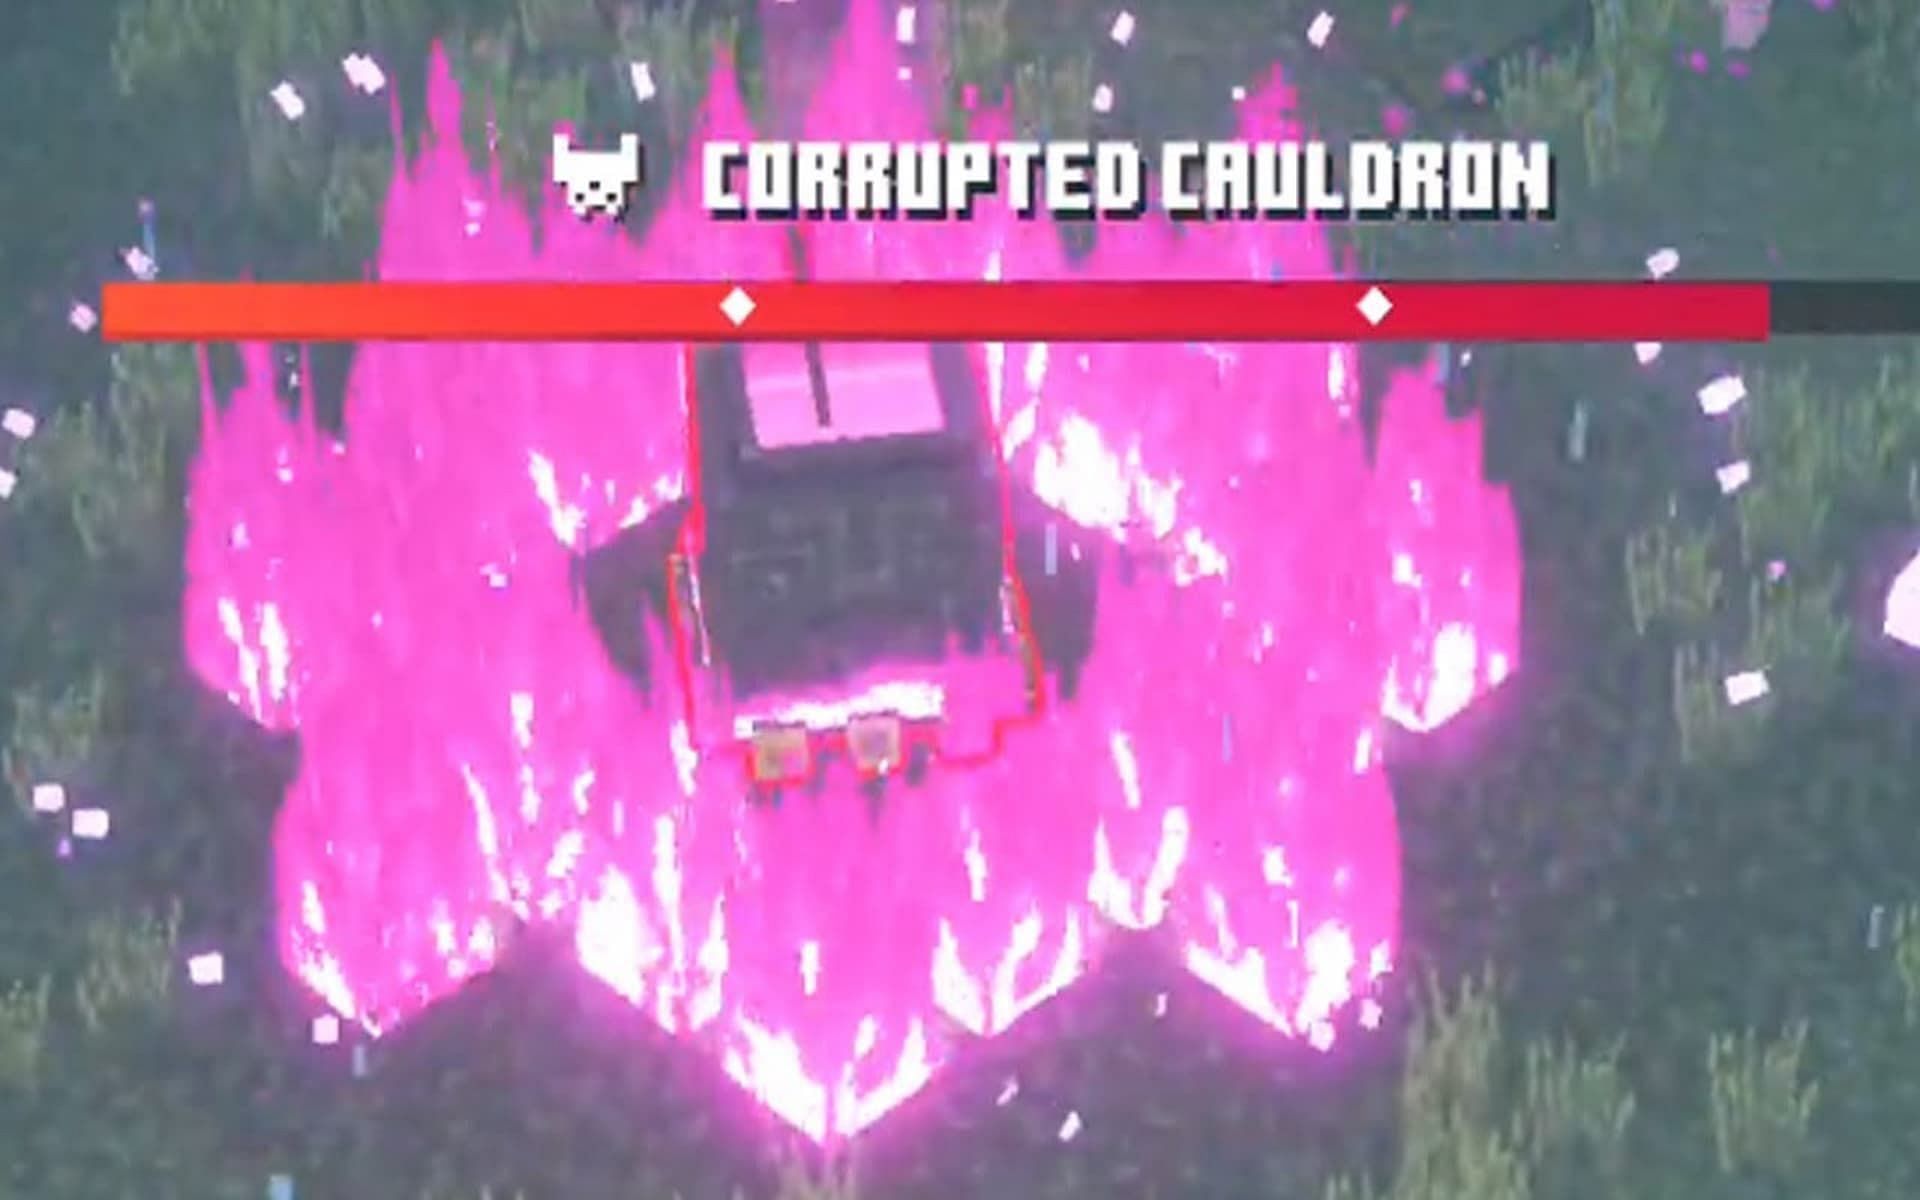 The Corrupted Cauldron can be a challenging boss (Image via YouTube/Boss Fighter)